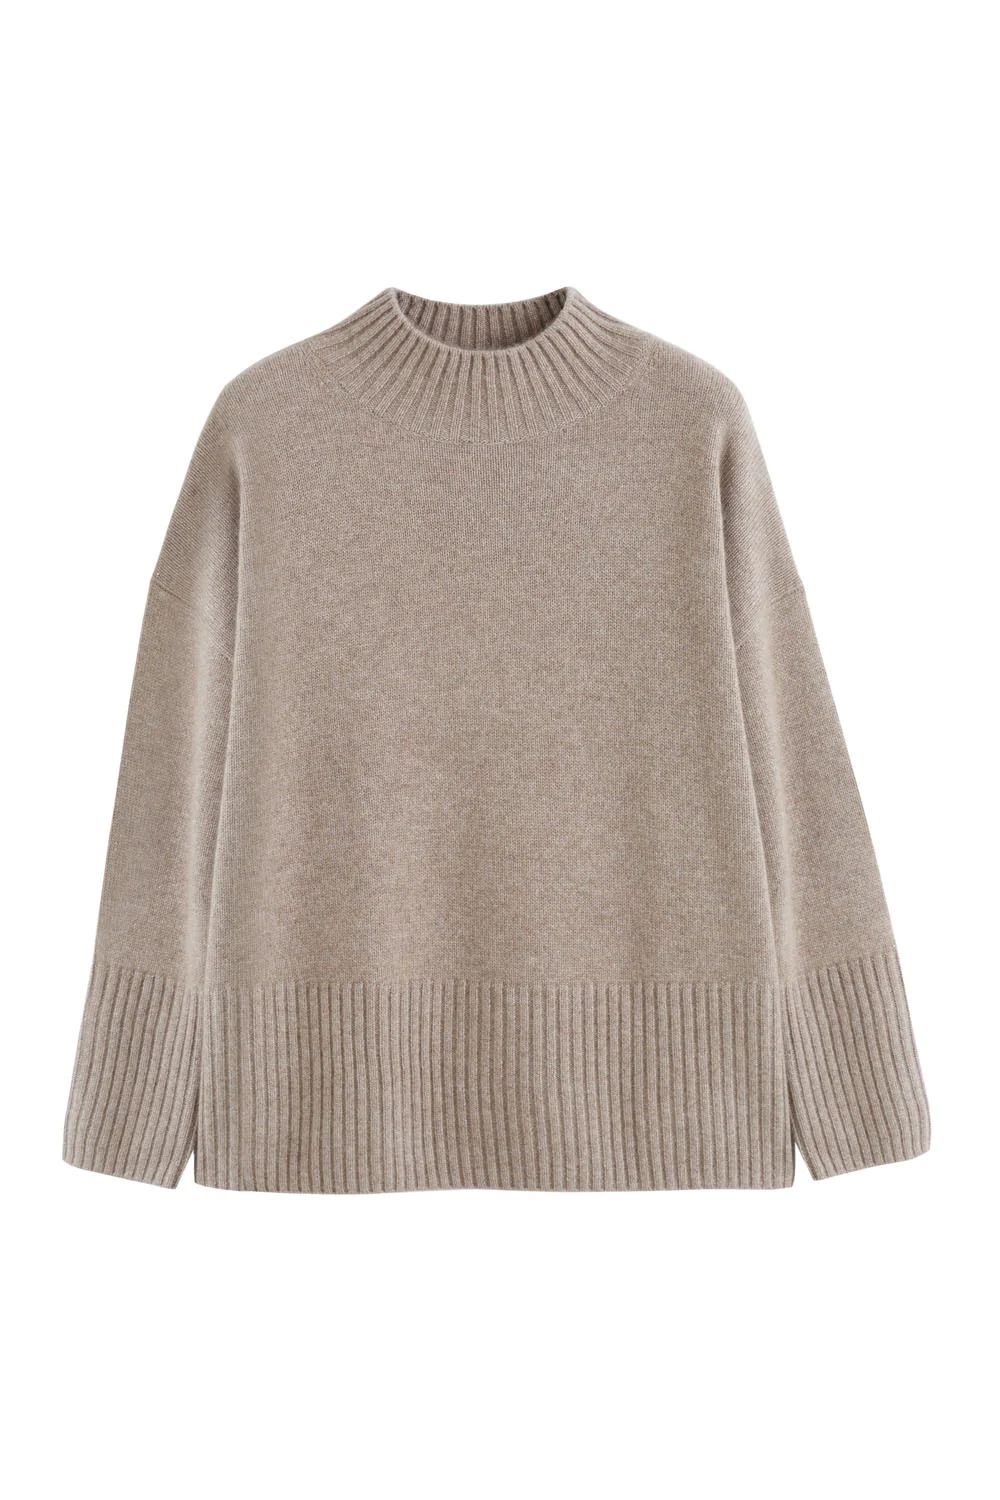 Soft-Truffle Cashmere Comfort Sweater | Chinti and Parker